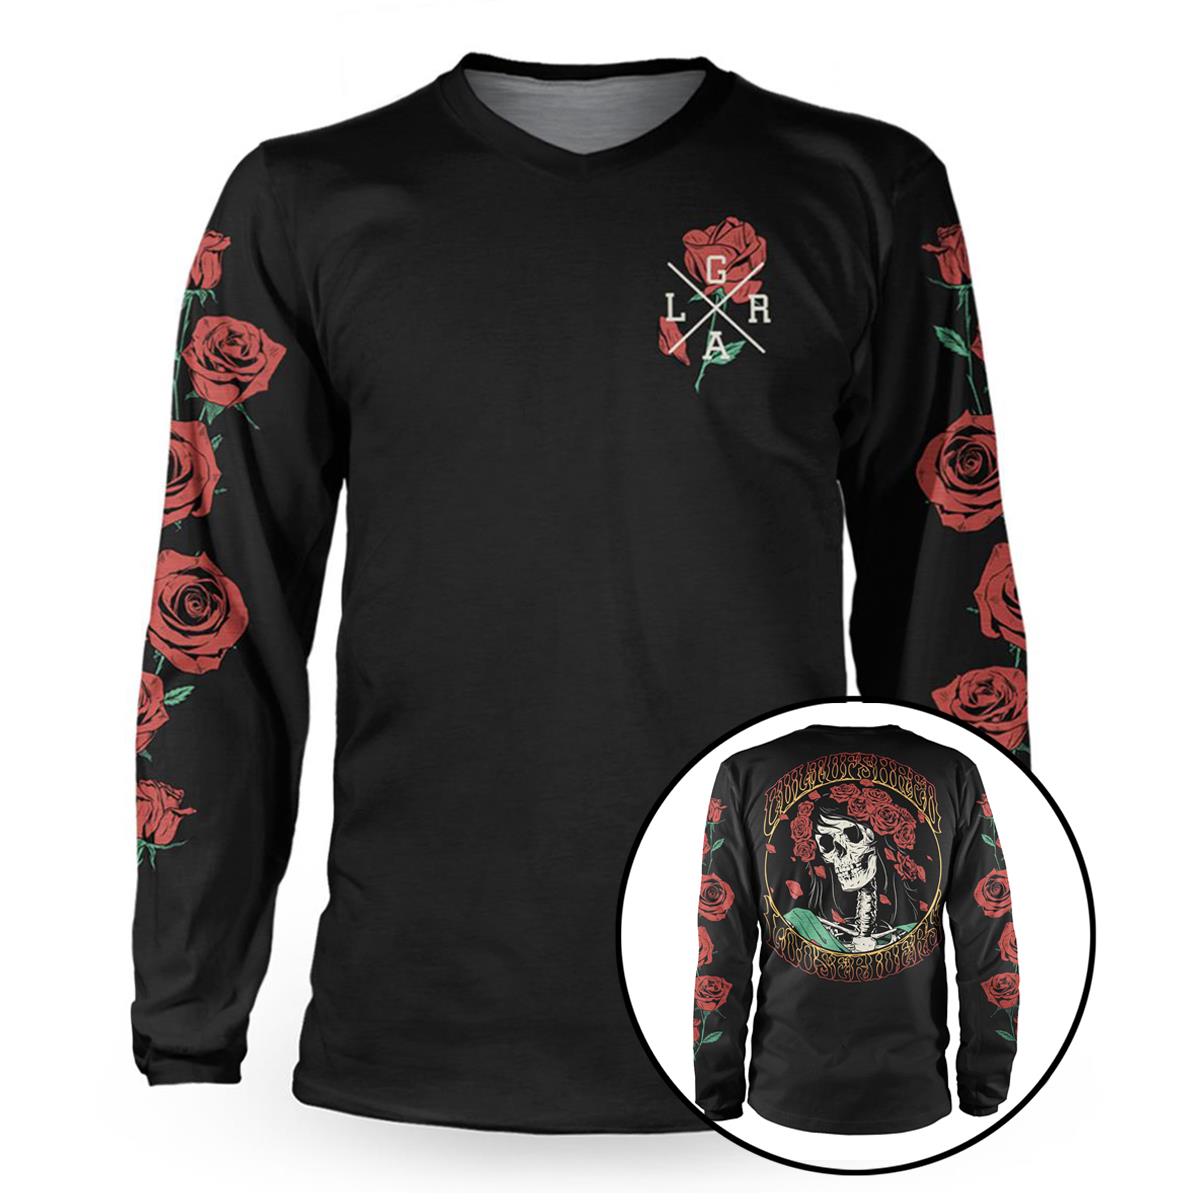 Loose Riders Downhill Jersey Long Sleeve Cult of Shred G-Shred - Black/Red